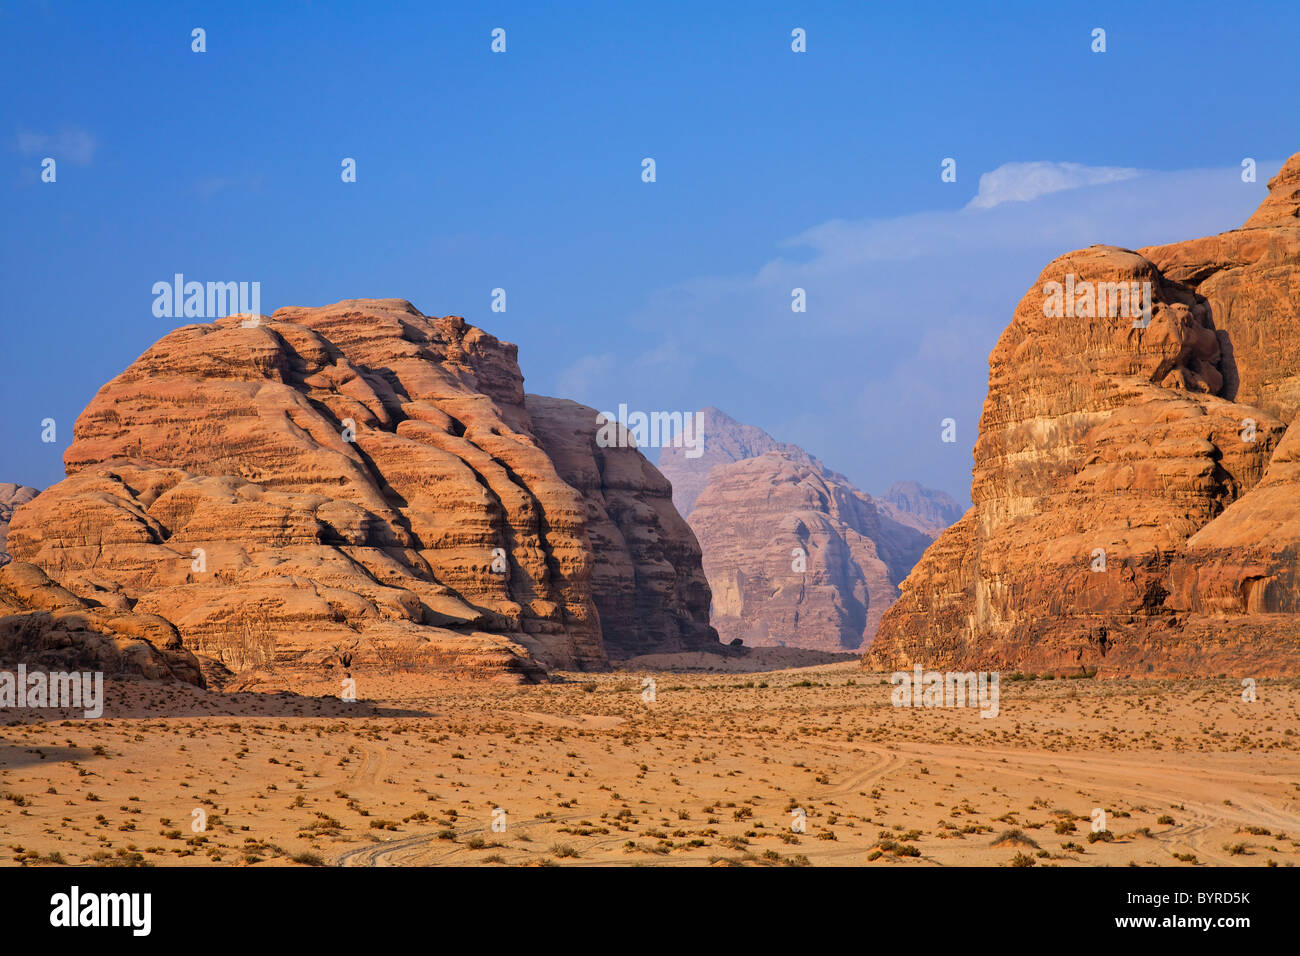 A landscape of rocky outcrops in the desert of Wadi Rum, Jordan Stock Photo